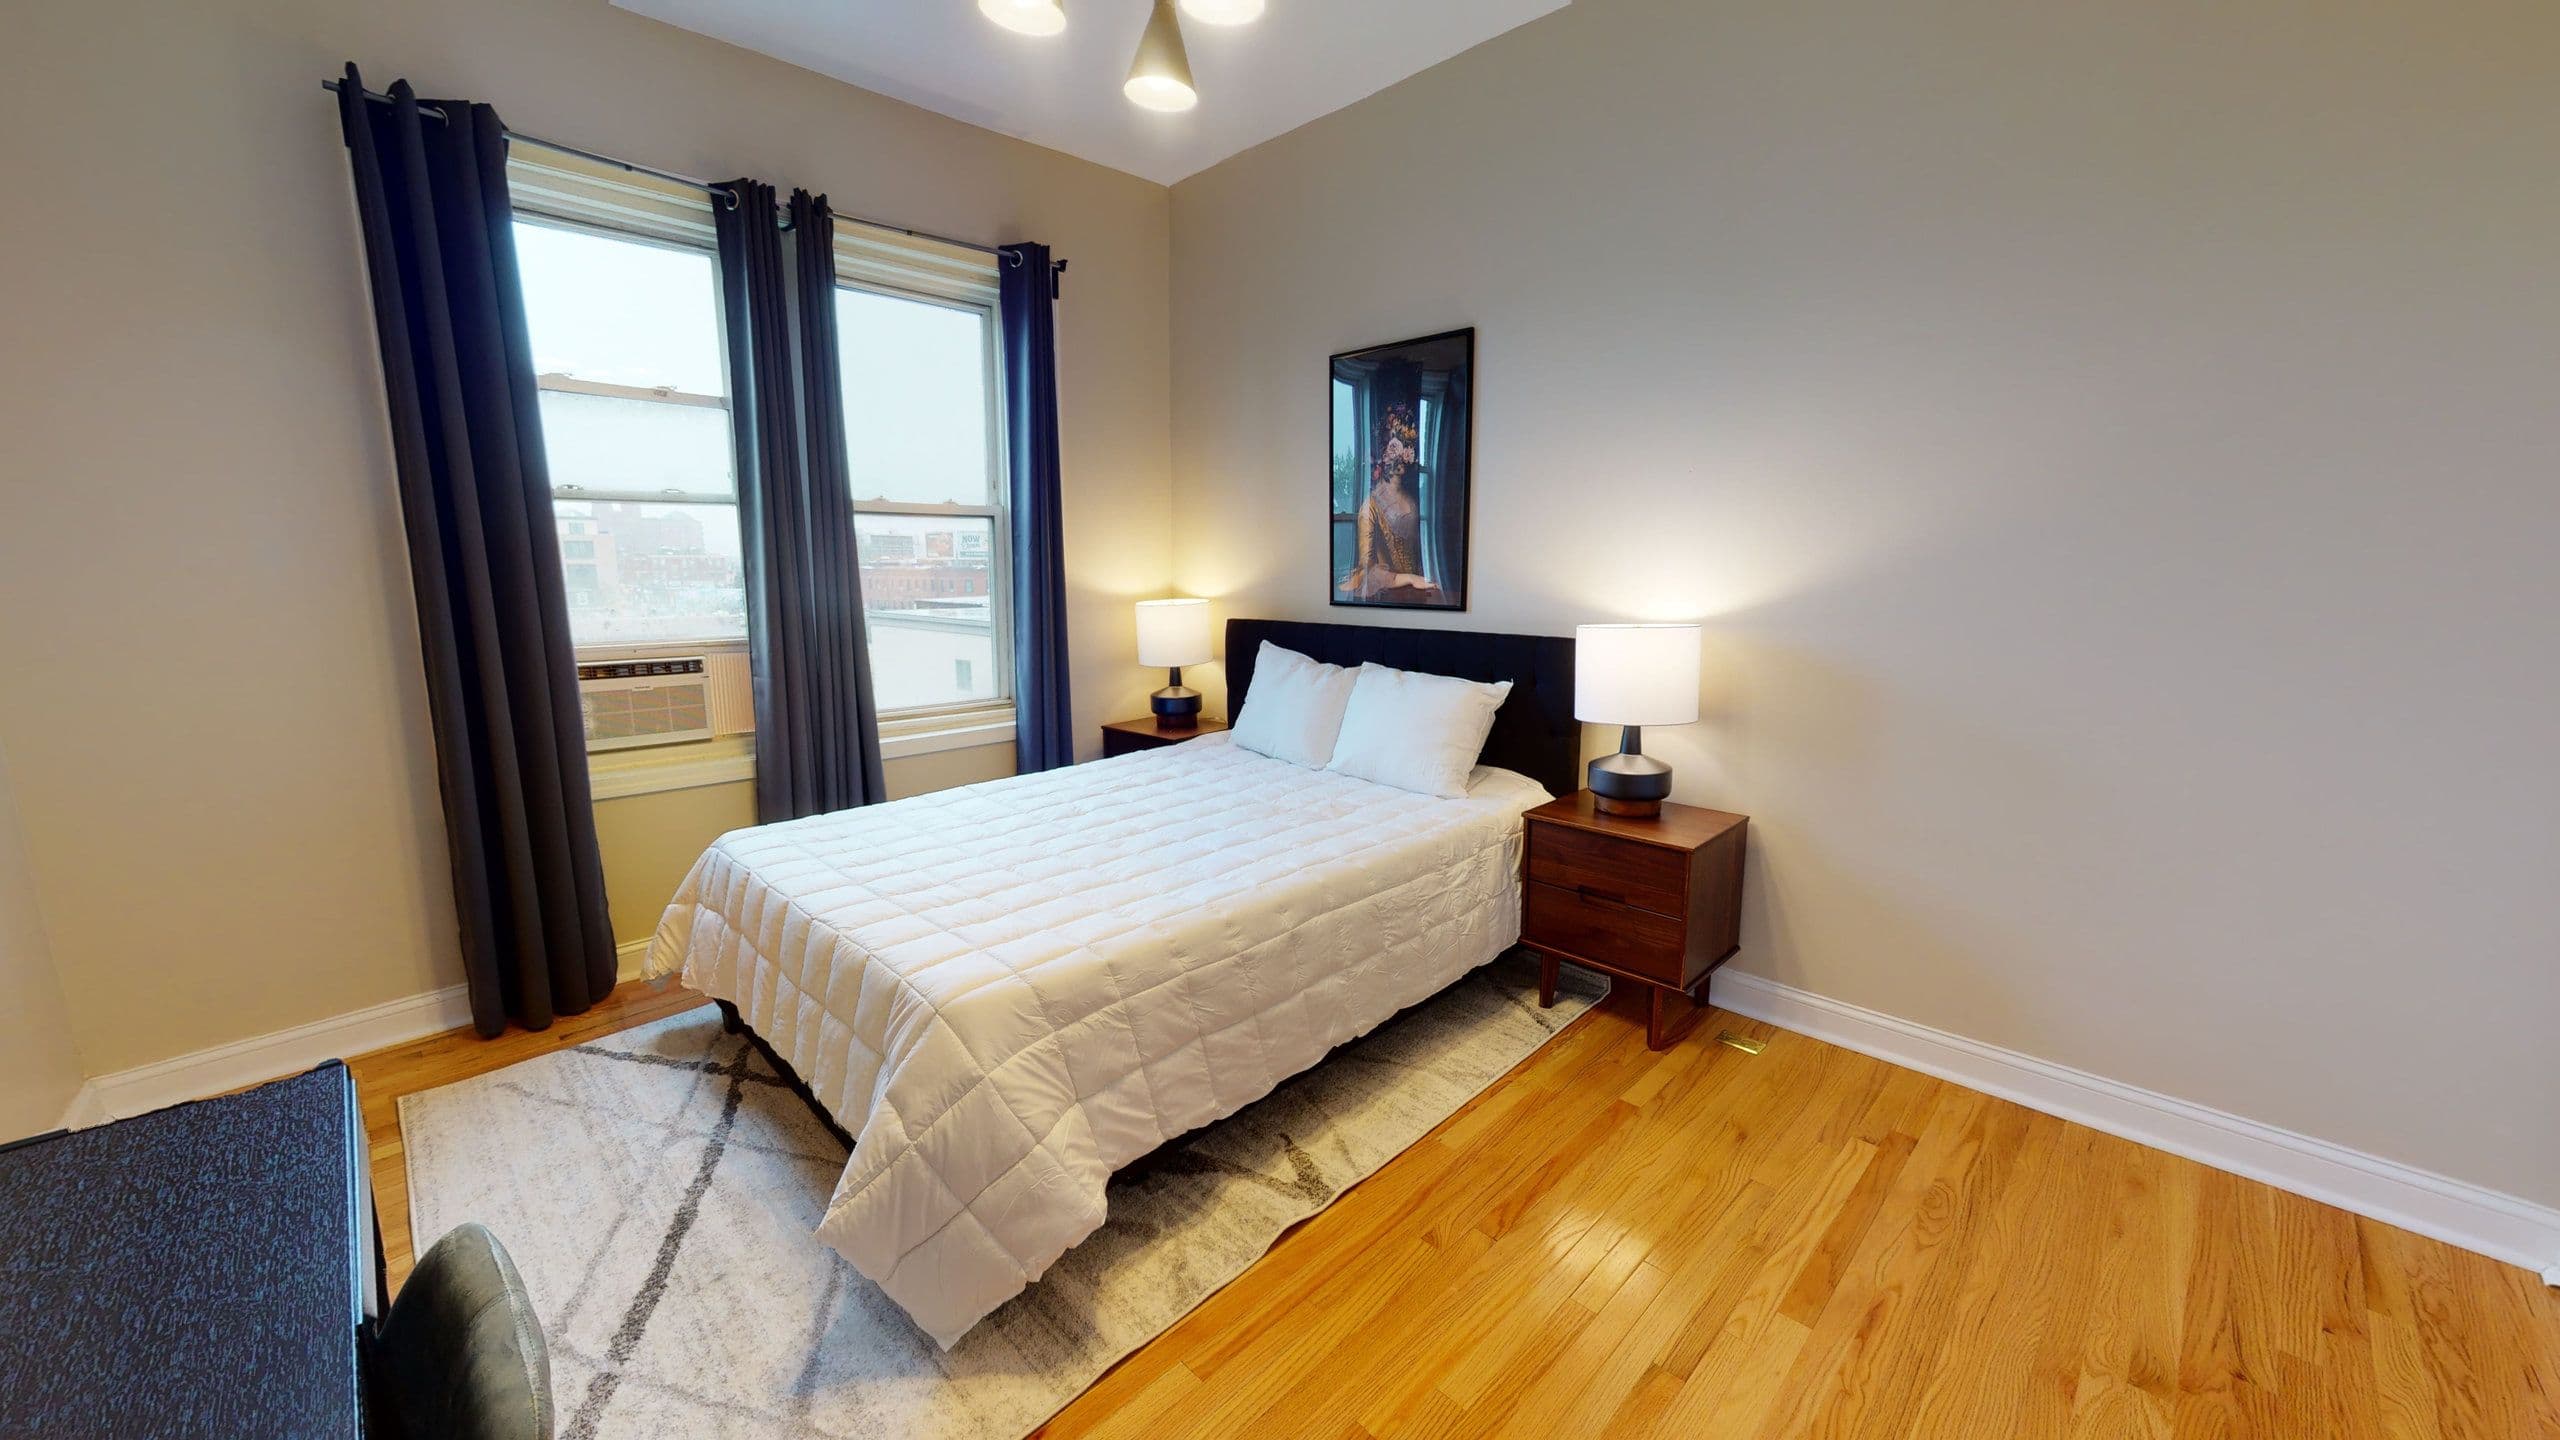 Photo 17 of #1159: Queen Bedroom A at June Homes